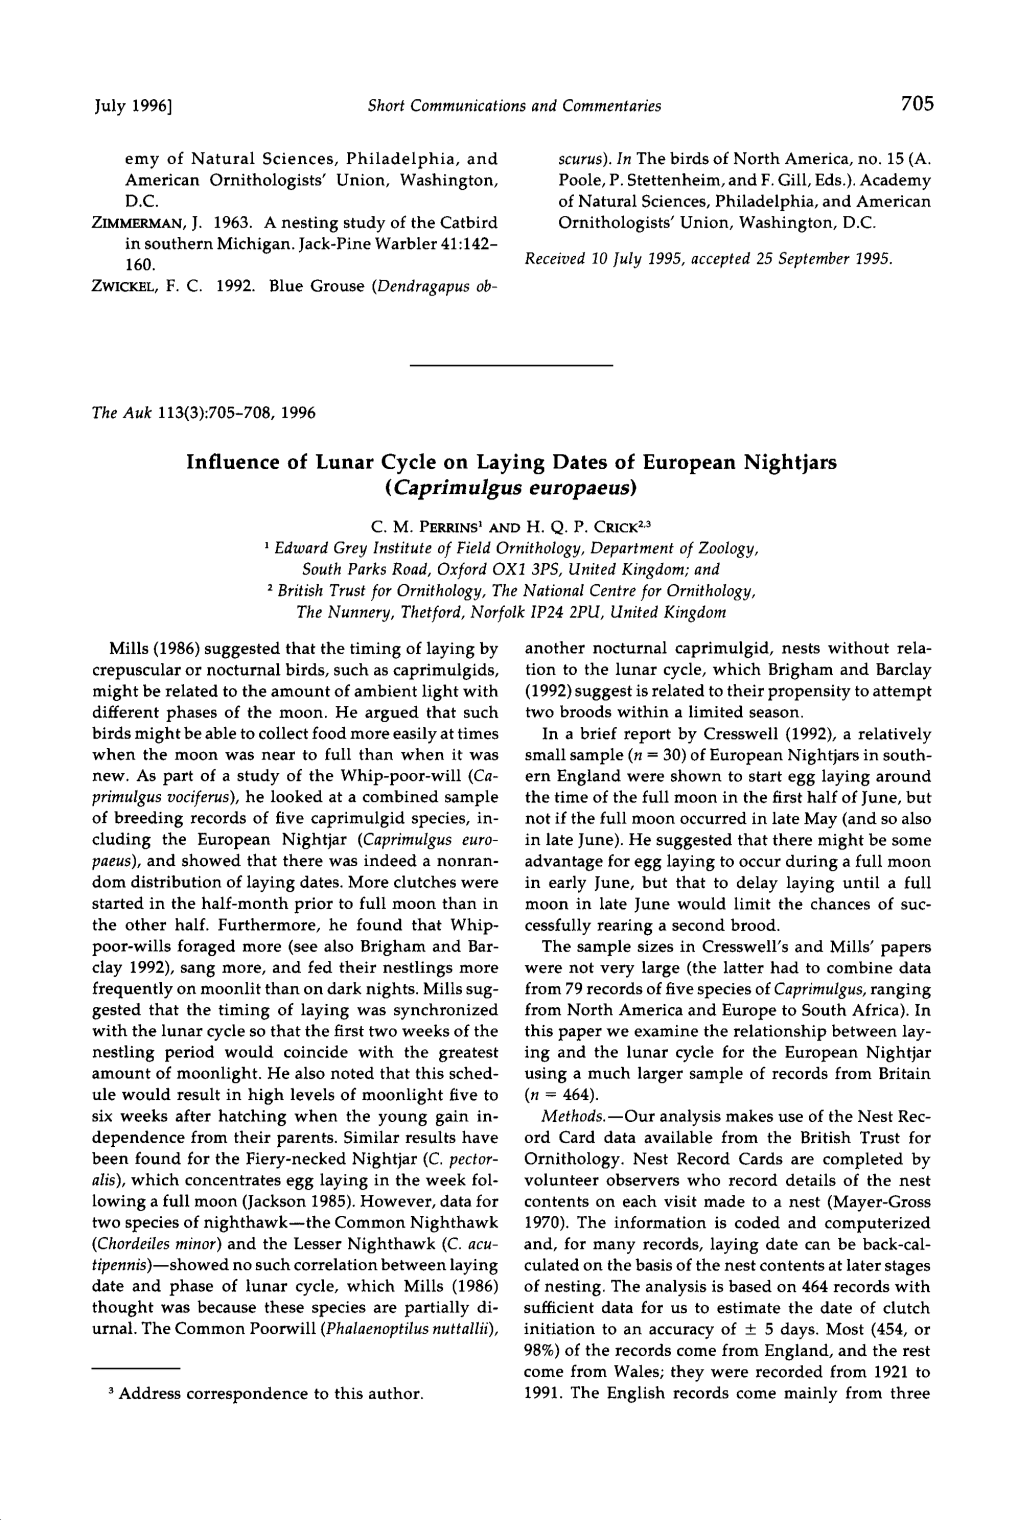 Influence of Lunar Cycle on Laying Dates of European Nightjars